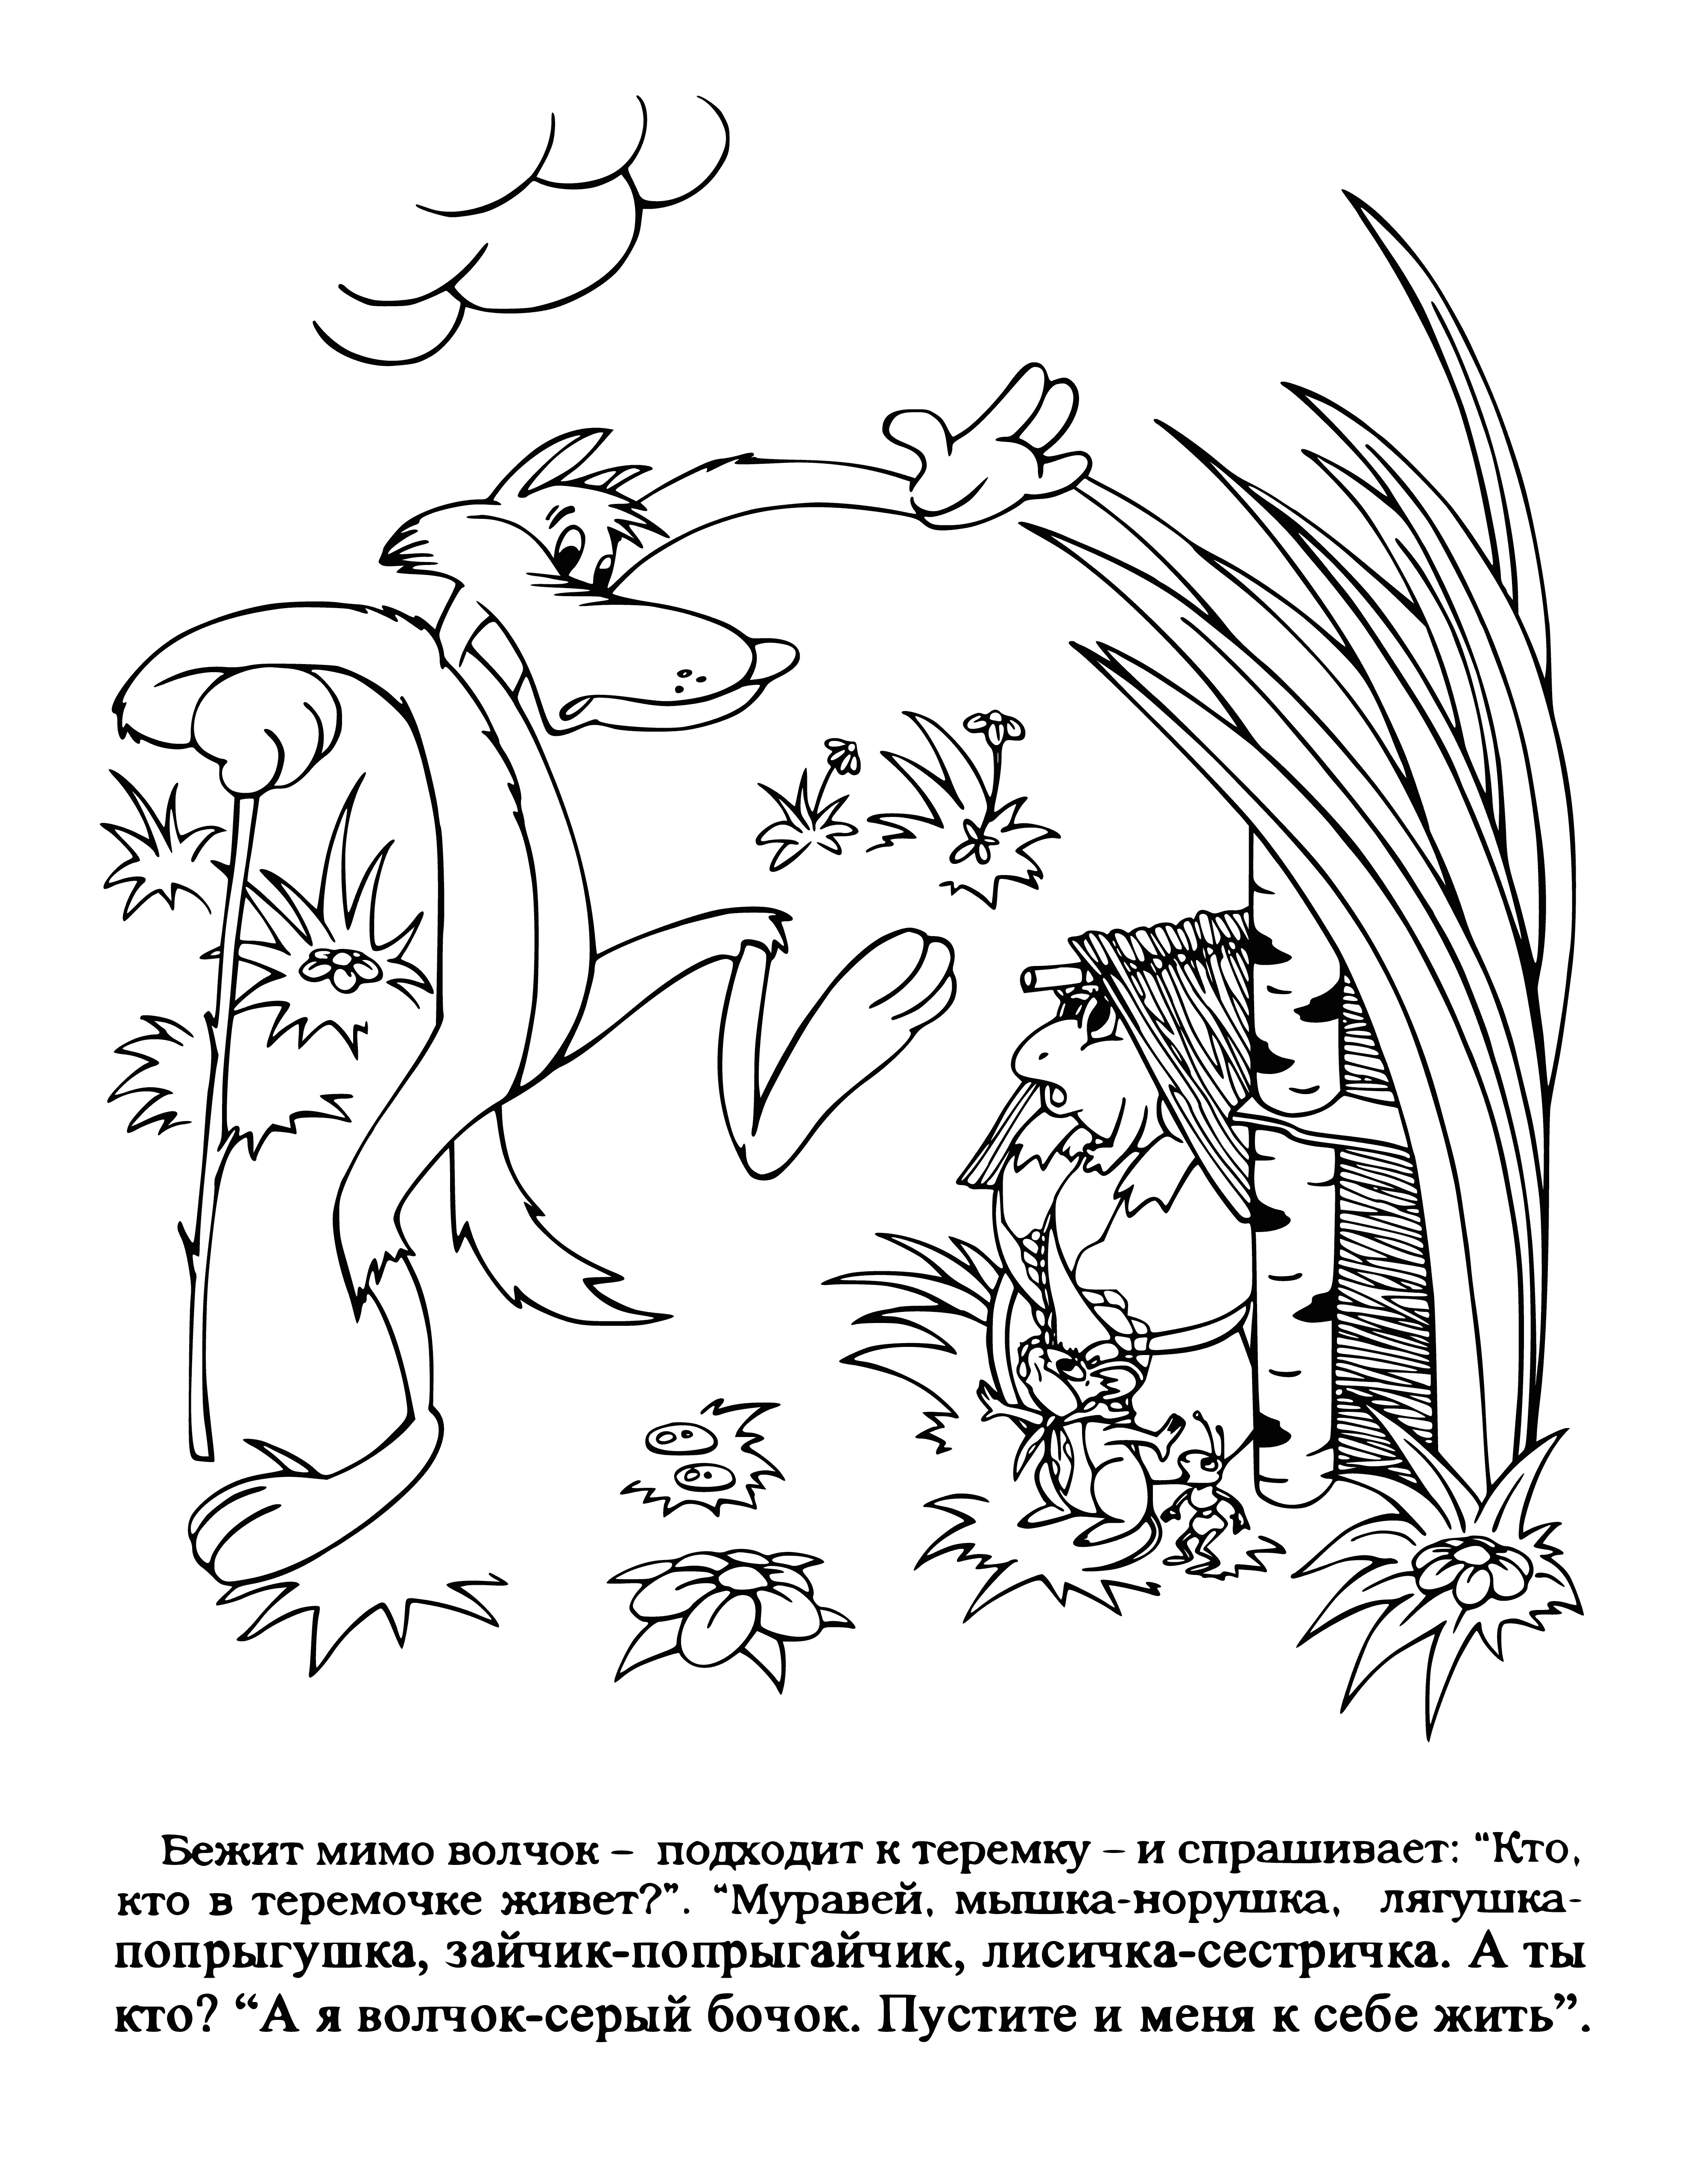 The wolf is asking coloring page